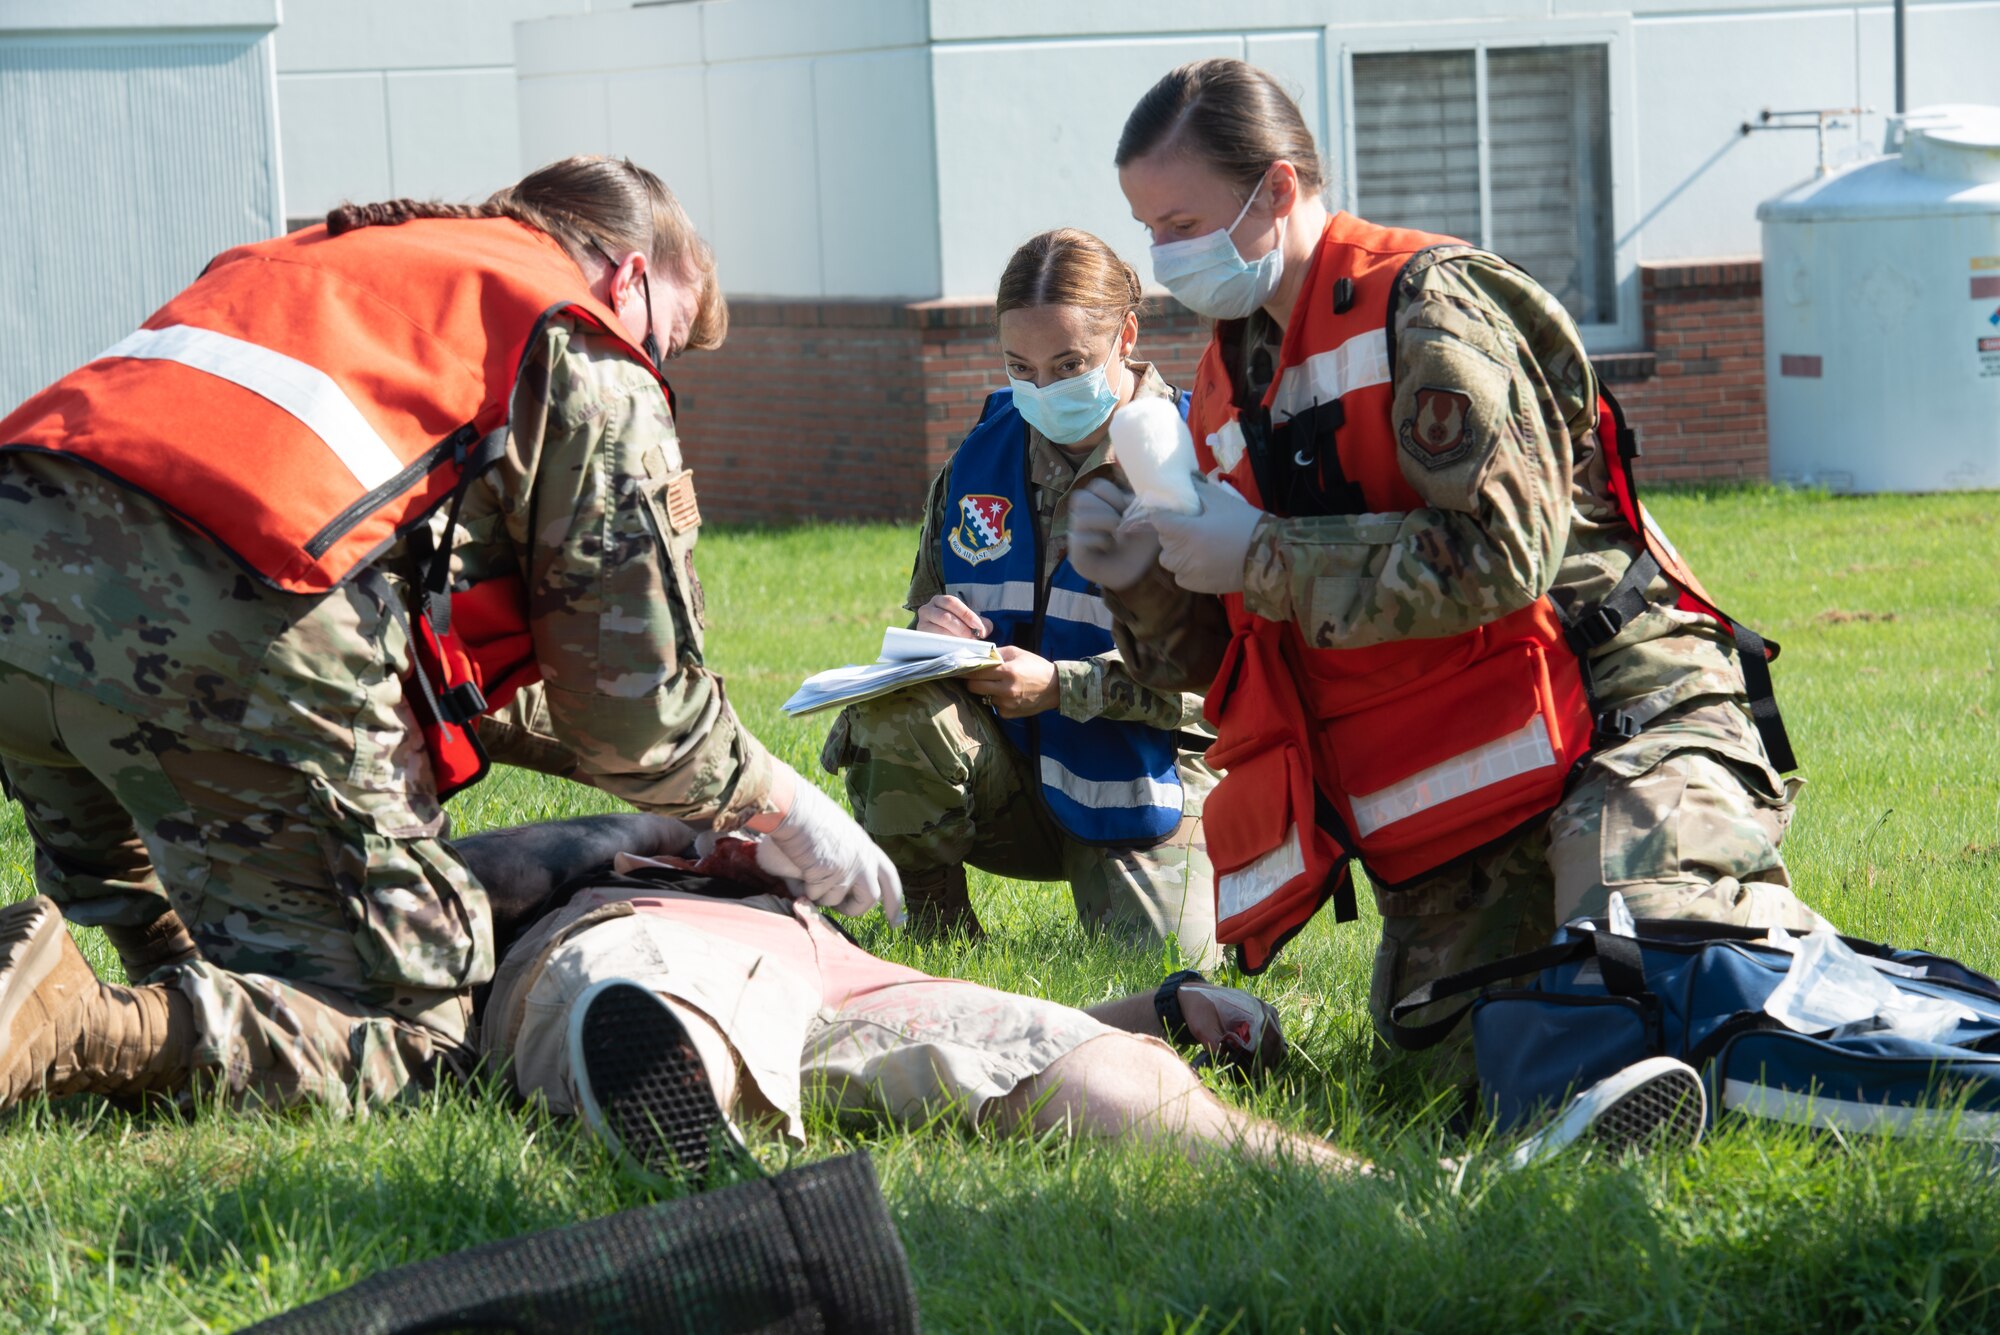 Maj. Andrea Tidd, left, 66th Medical Squadron Field Response Team chief, and Tech Sgt. Tatiana Lieback, 66 MDS Field Response Team member, provide support to a simulated victim during a Ready Eagle exercise at Hanscom Air Force Base, Mass., July 30, while Maj. Stela Strilagas, Inspection Team member, looks on. The full-scale disaster response exercise tested Hanscom medics on their response to a chemical, biological, radiological, nuclear, or explosive event. (U.S. Air Force photo by Todd Maki)